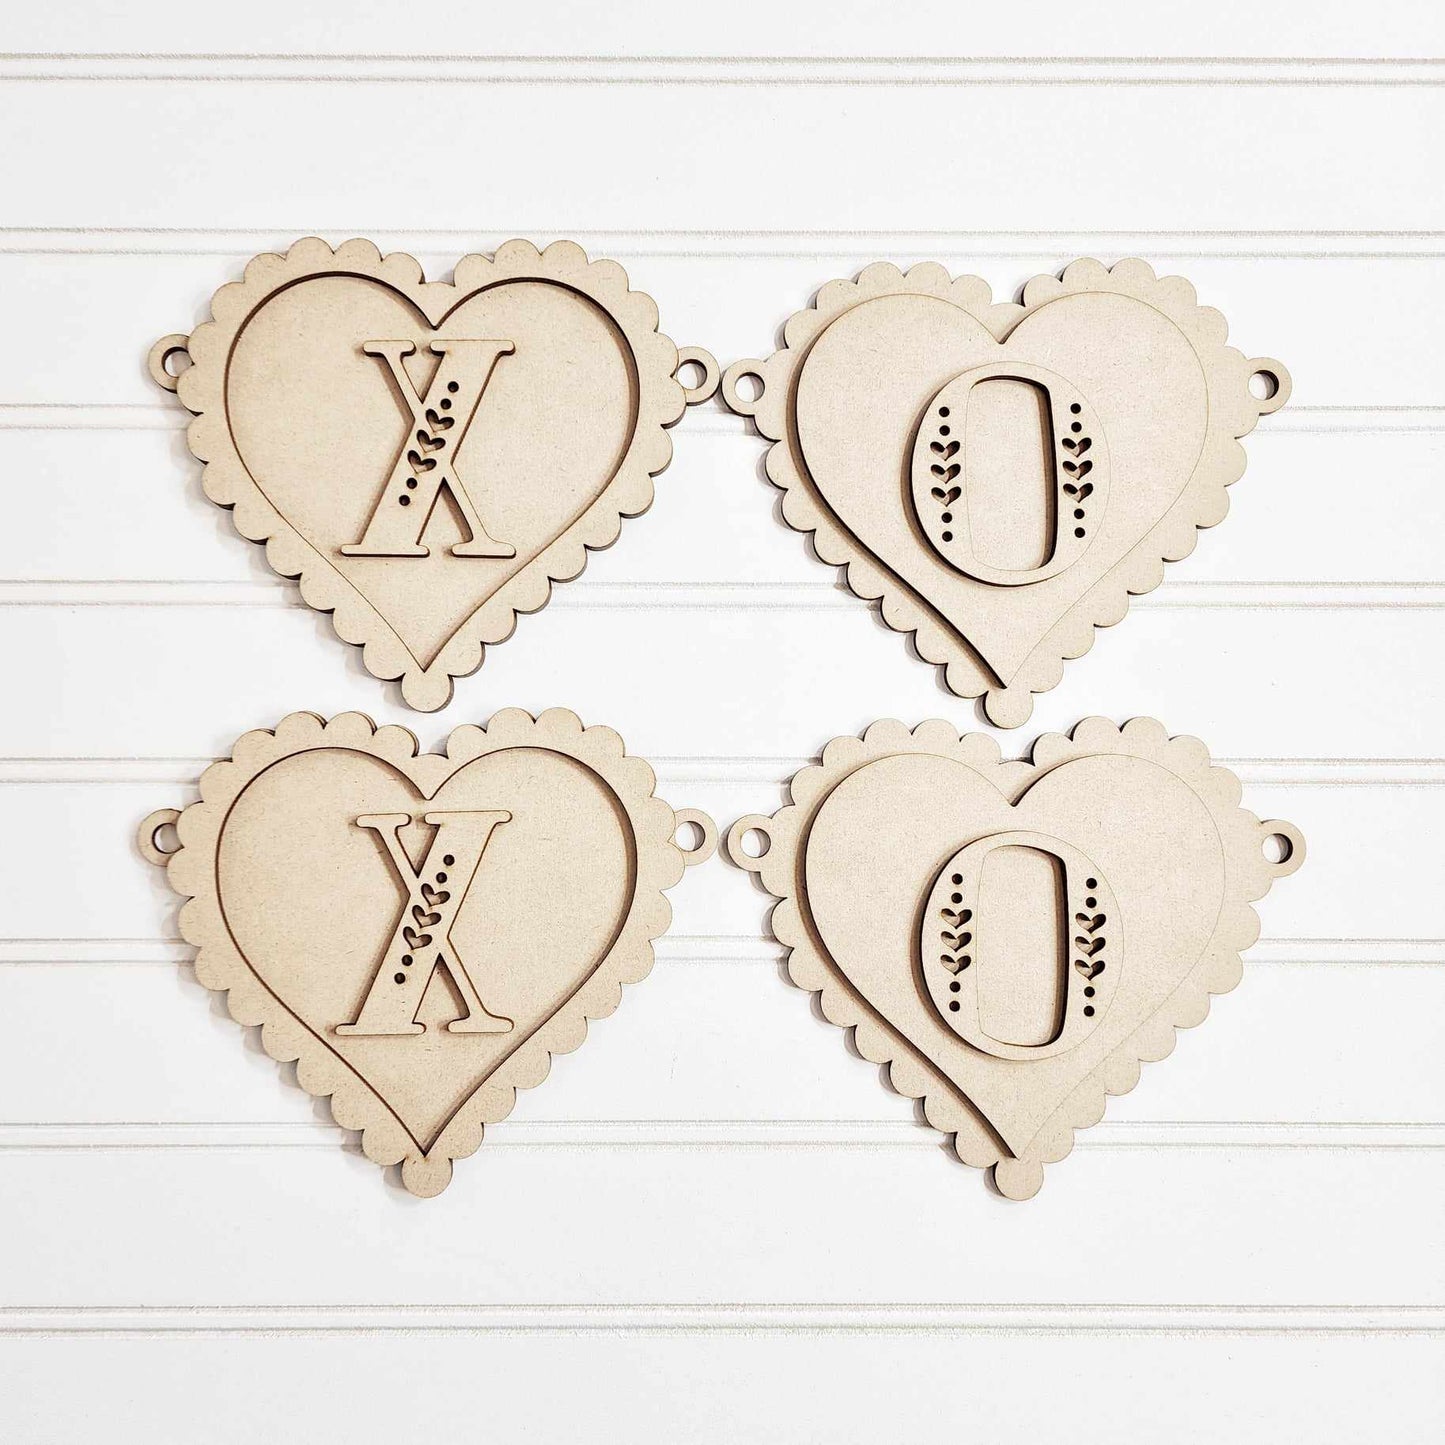 XOXO Valentines garland cutouts, unpainted ready for you to finish